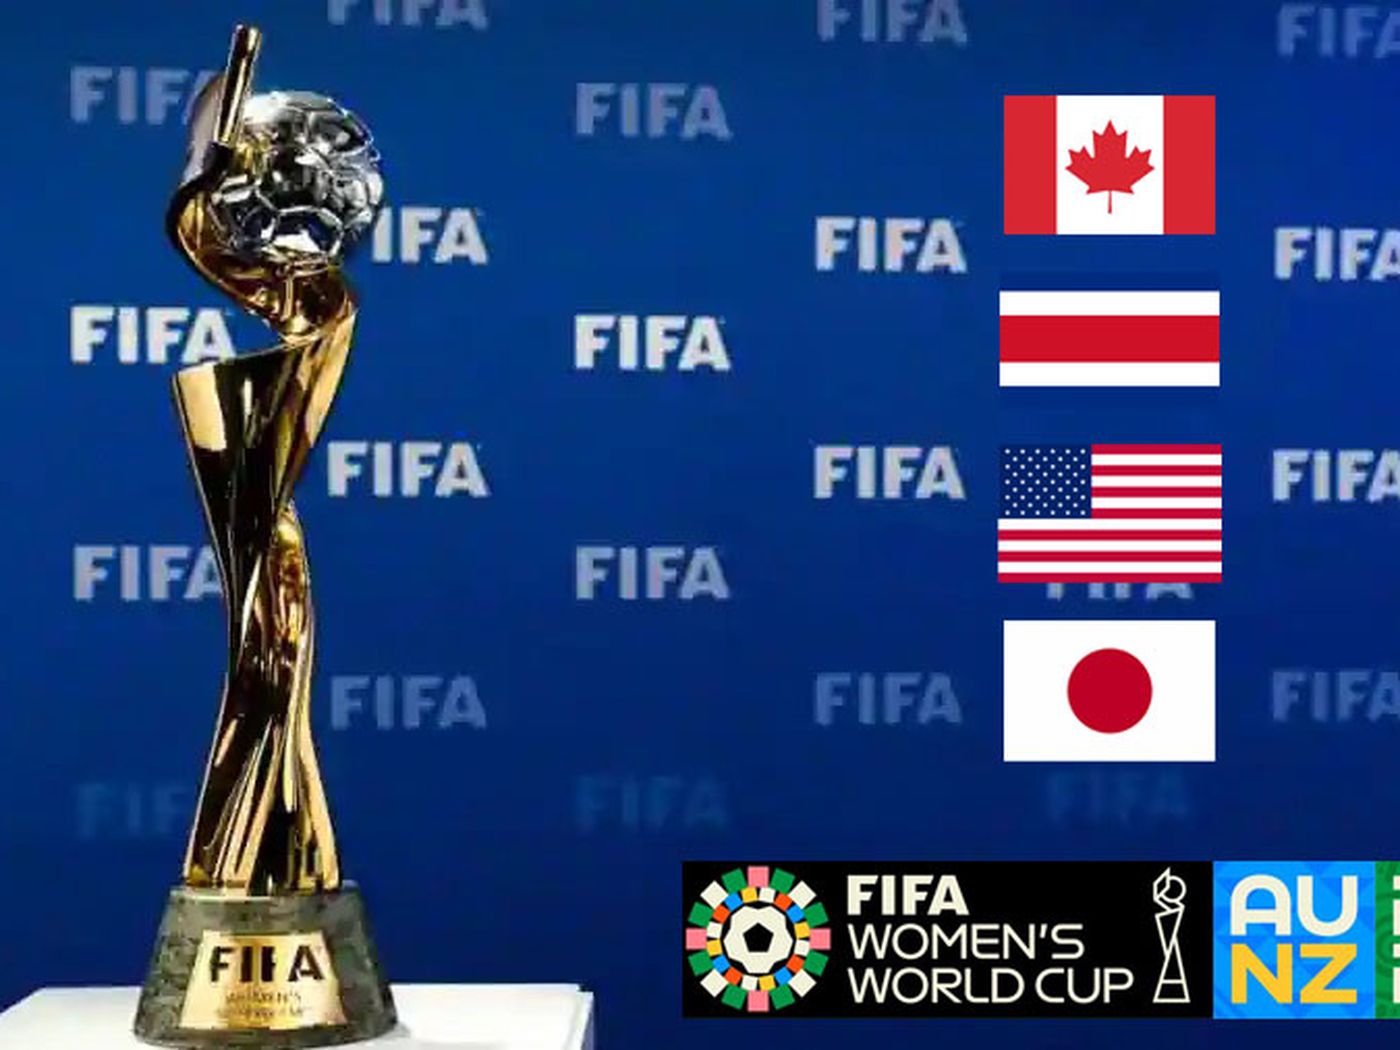 Teams to watch at Women's World Cup 2023: A preview of the top teams that are expected to perform well in the Women's World Cup 2023